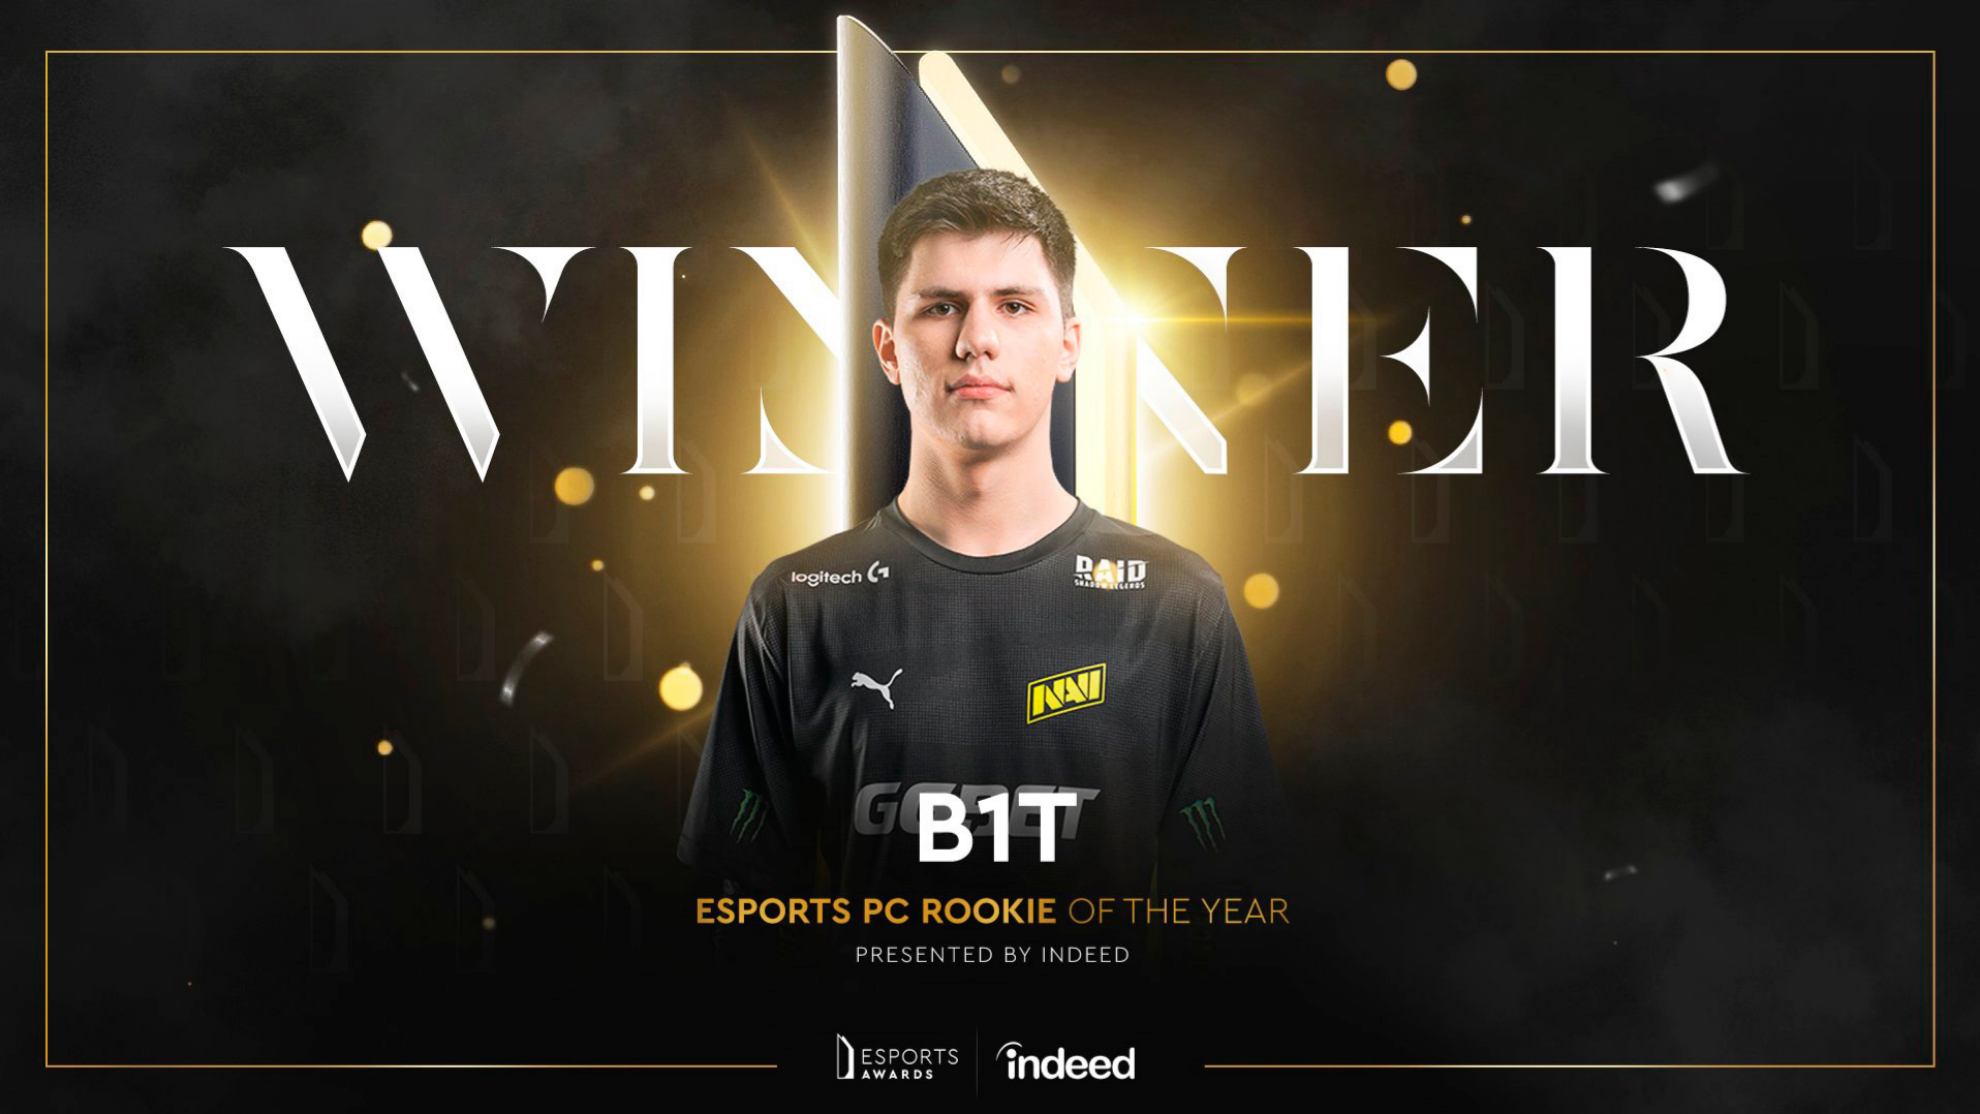 Esports PC Rookie of the Year